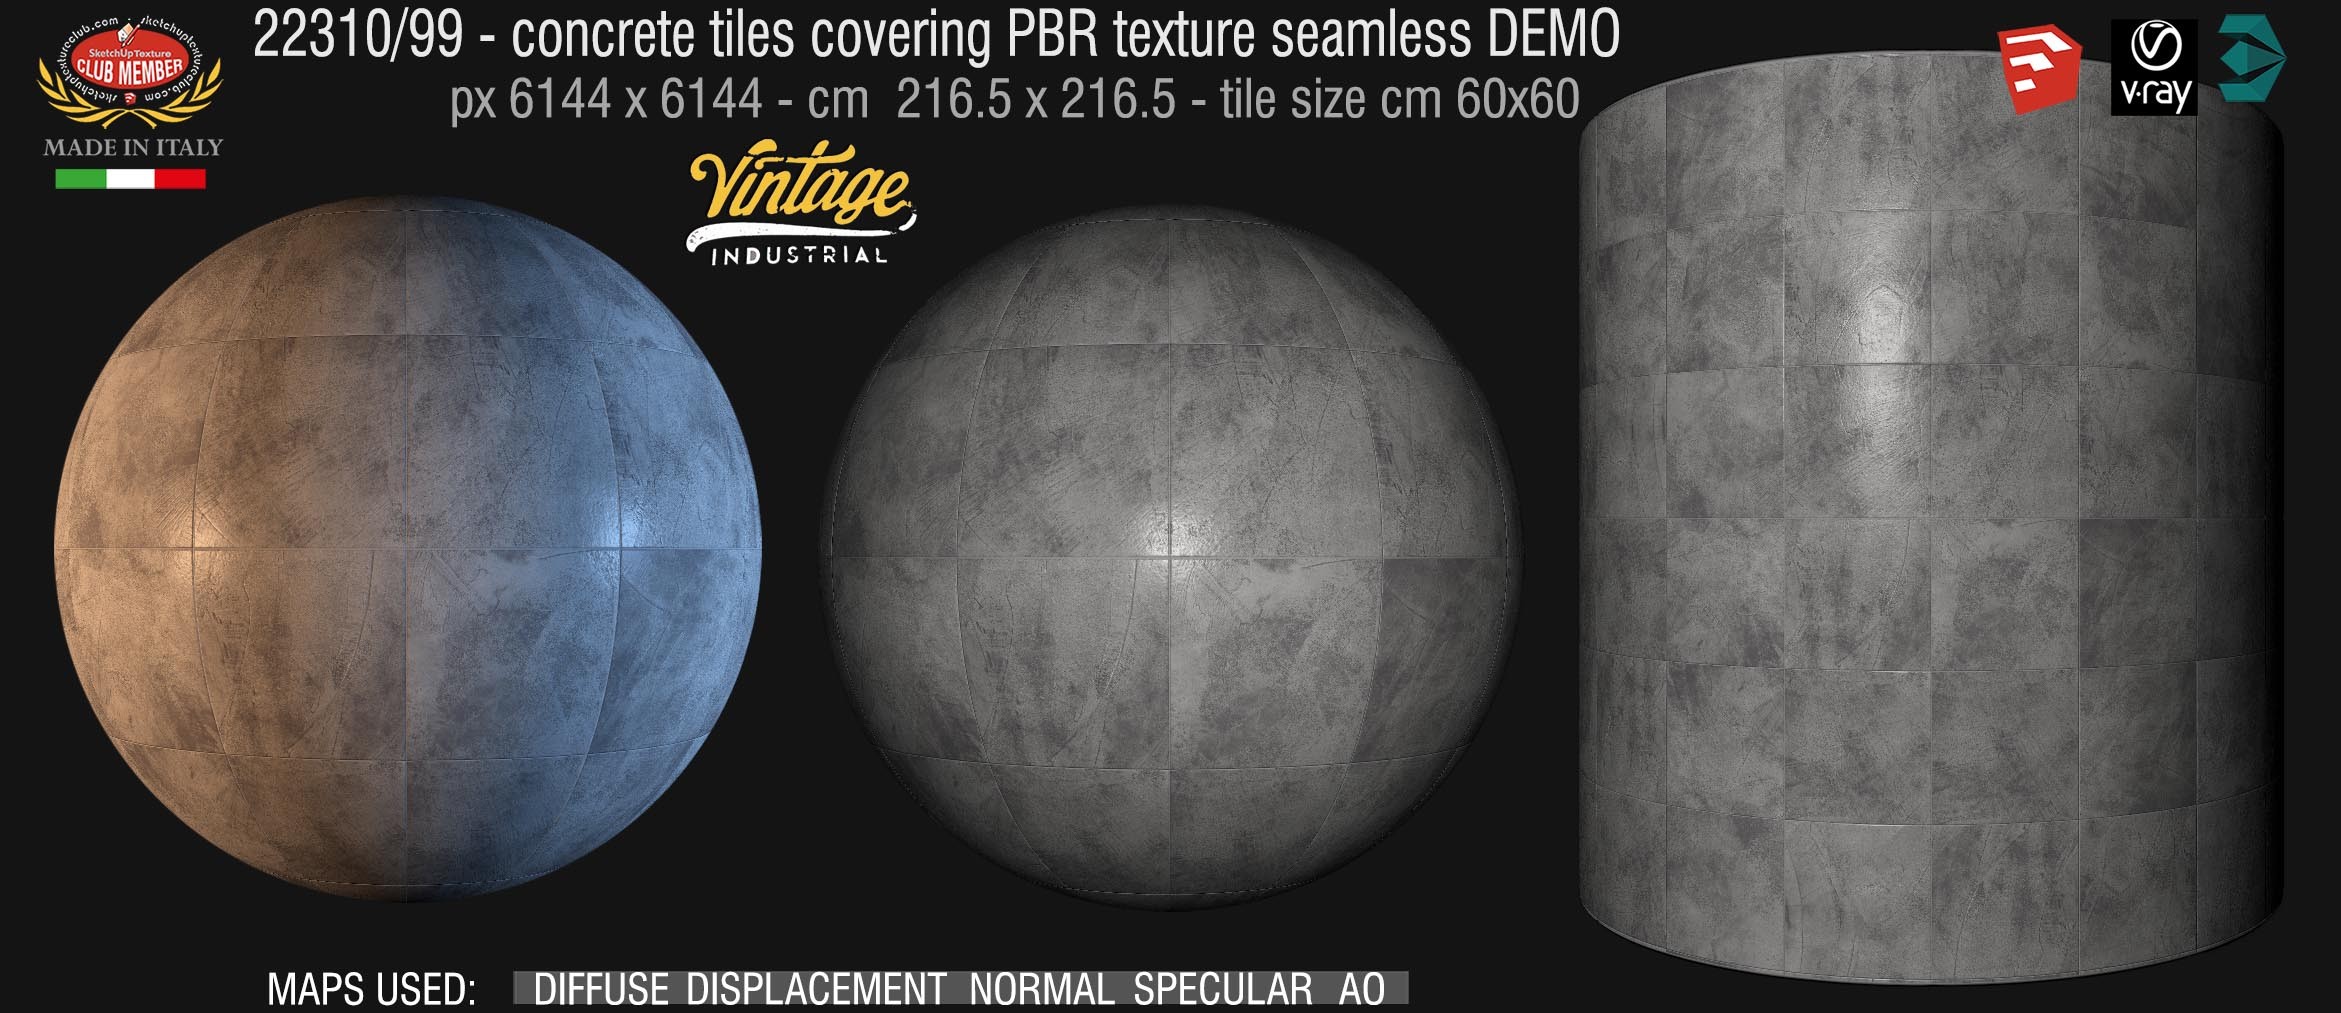 22310_99 concrete tiles covering PBR texture seamless DEMO